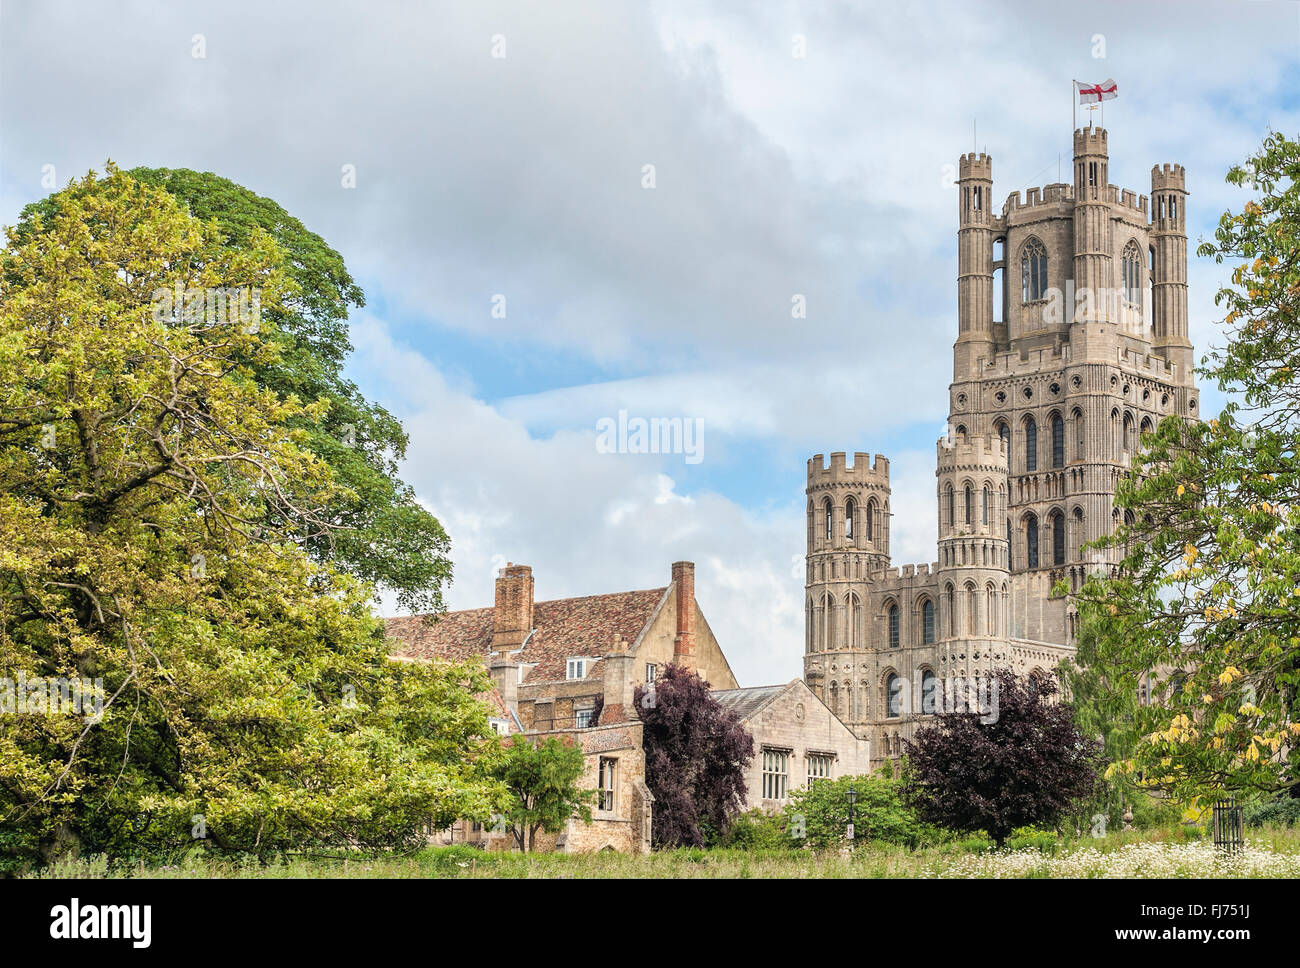 Cathedral Church of Ely, bekannt als die 'Ship of the Fens', Cambridgeshire, England Stockfoto